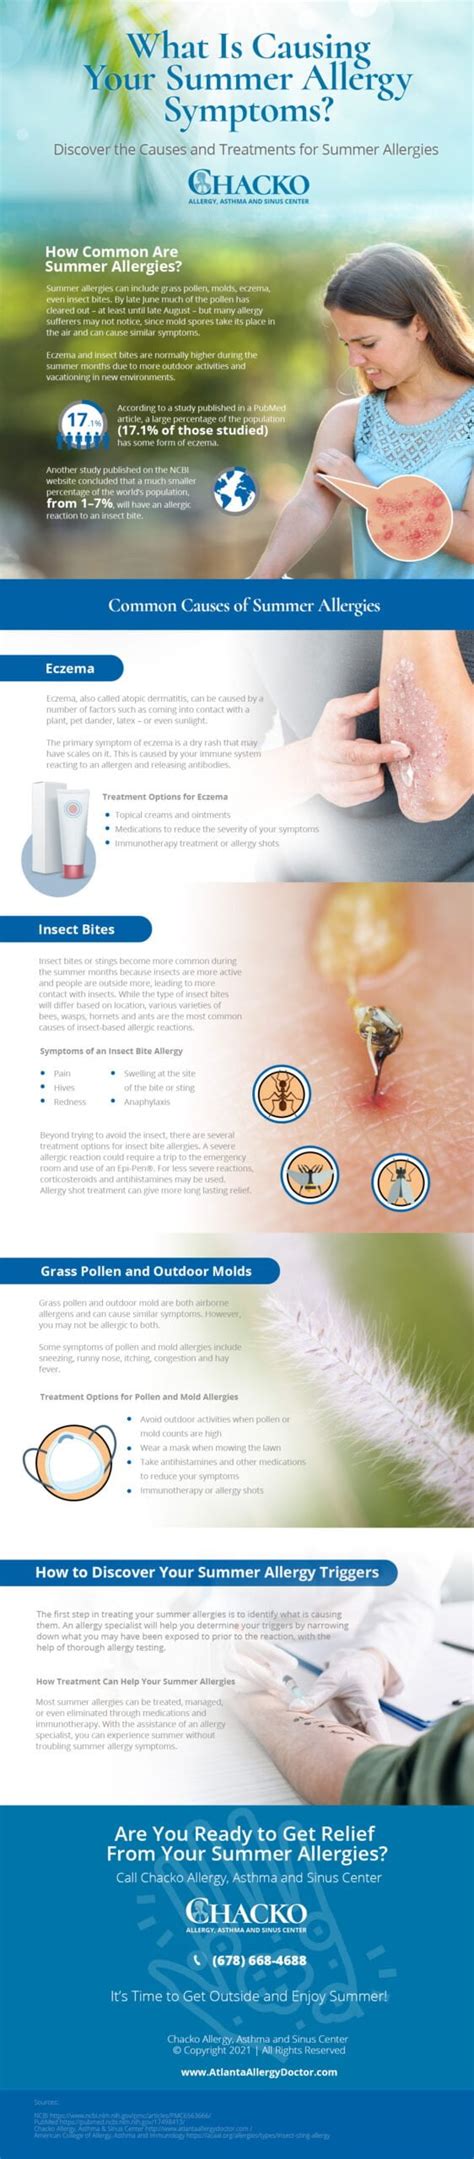 What Is Causing My Summer Allergies Infographic Included Chacko Allergy